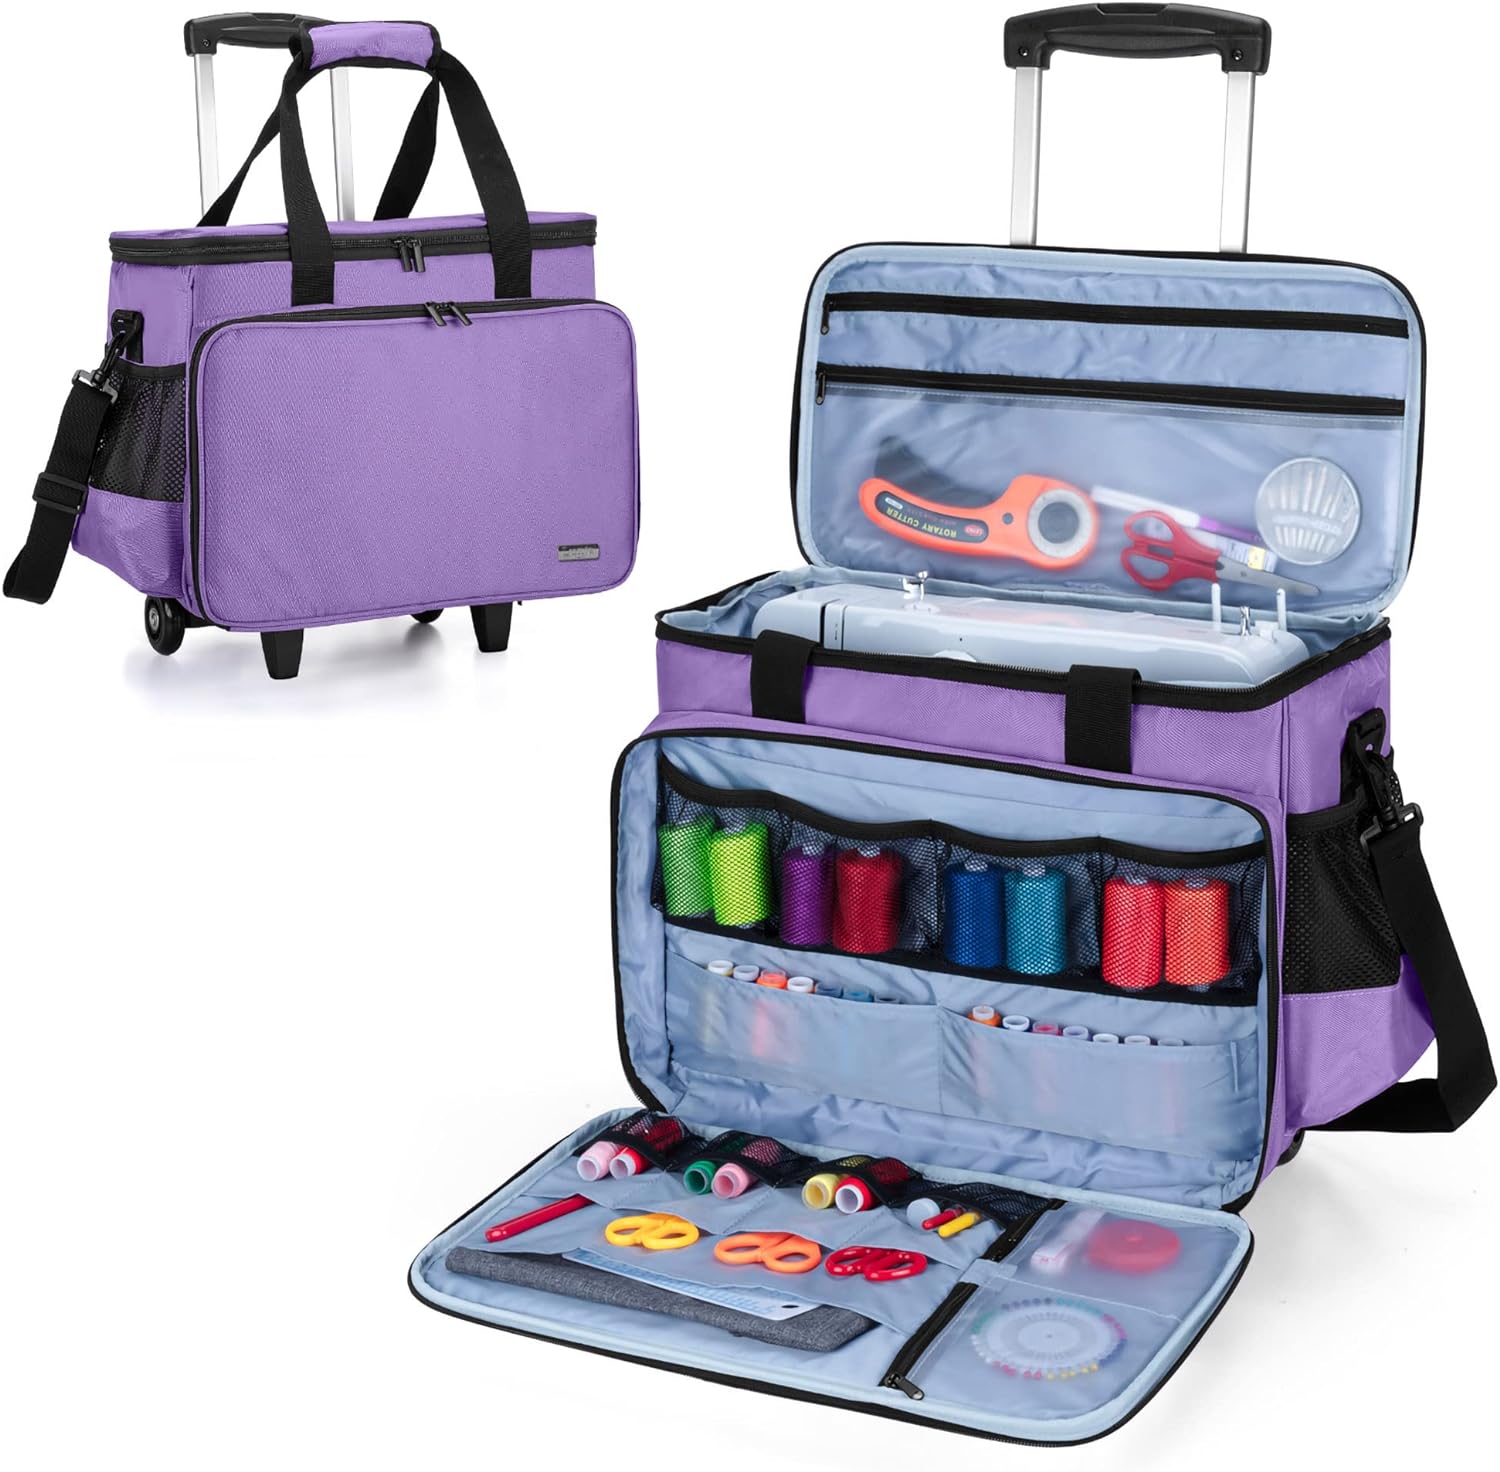 LUXJA Sewing Machine Case with Detachable Dolly and Removable Bottom Pad, Rolling Sewing Machine Tote Fits for Most Standard Sewing Machines, Purple